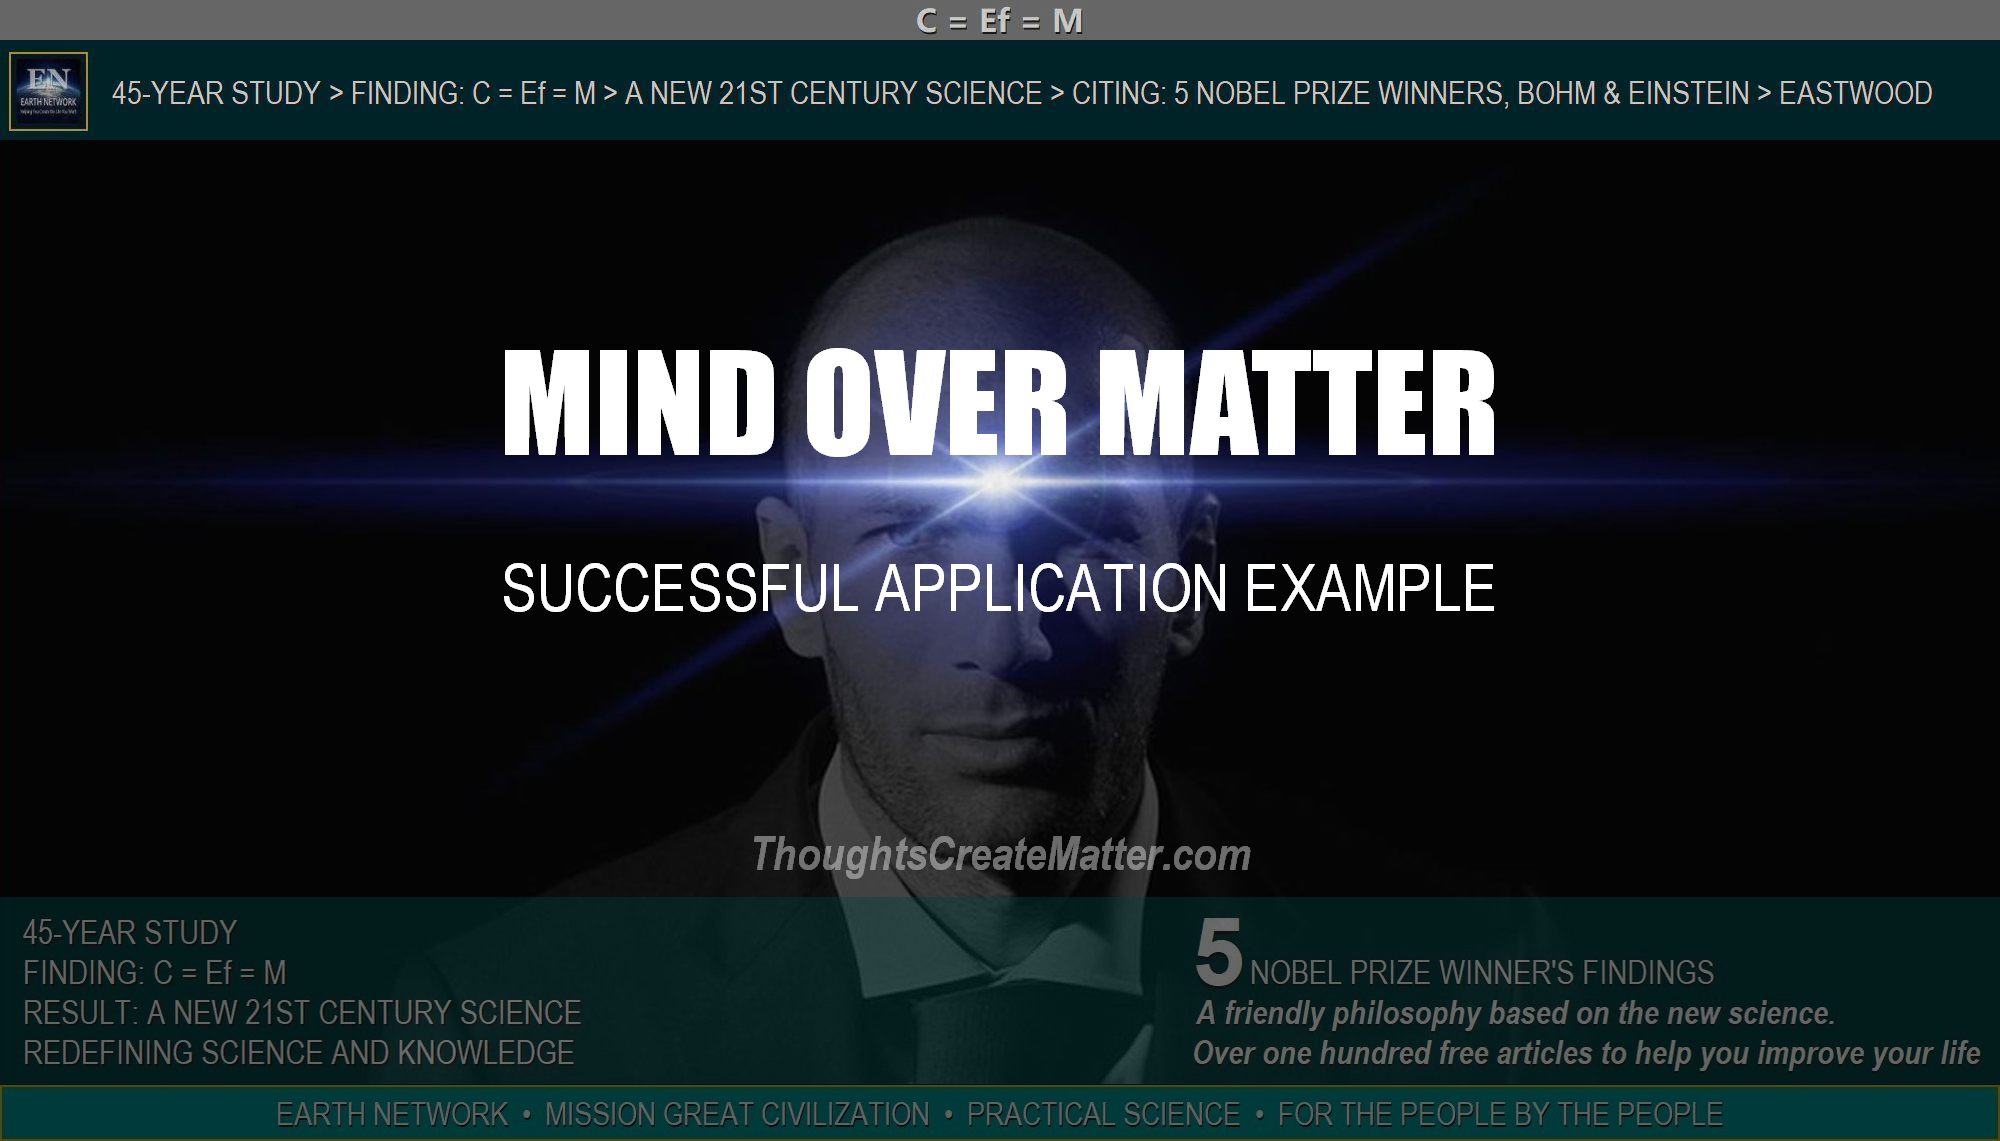 Image depicts how to use mind over matter. An example of success using mind over matter.